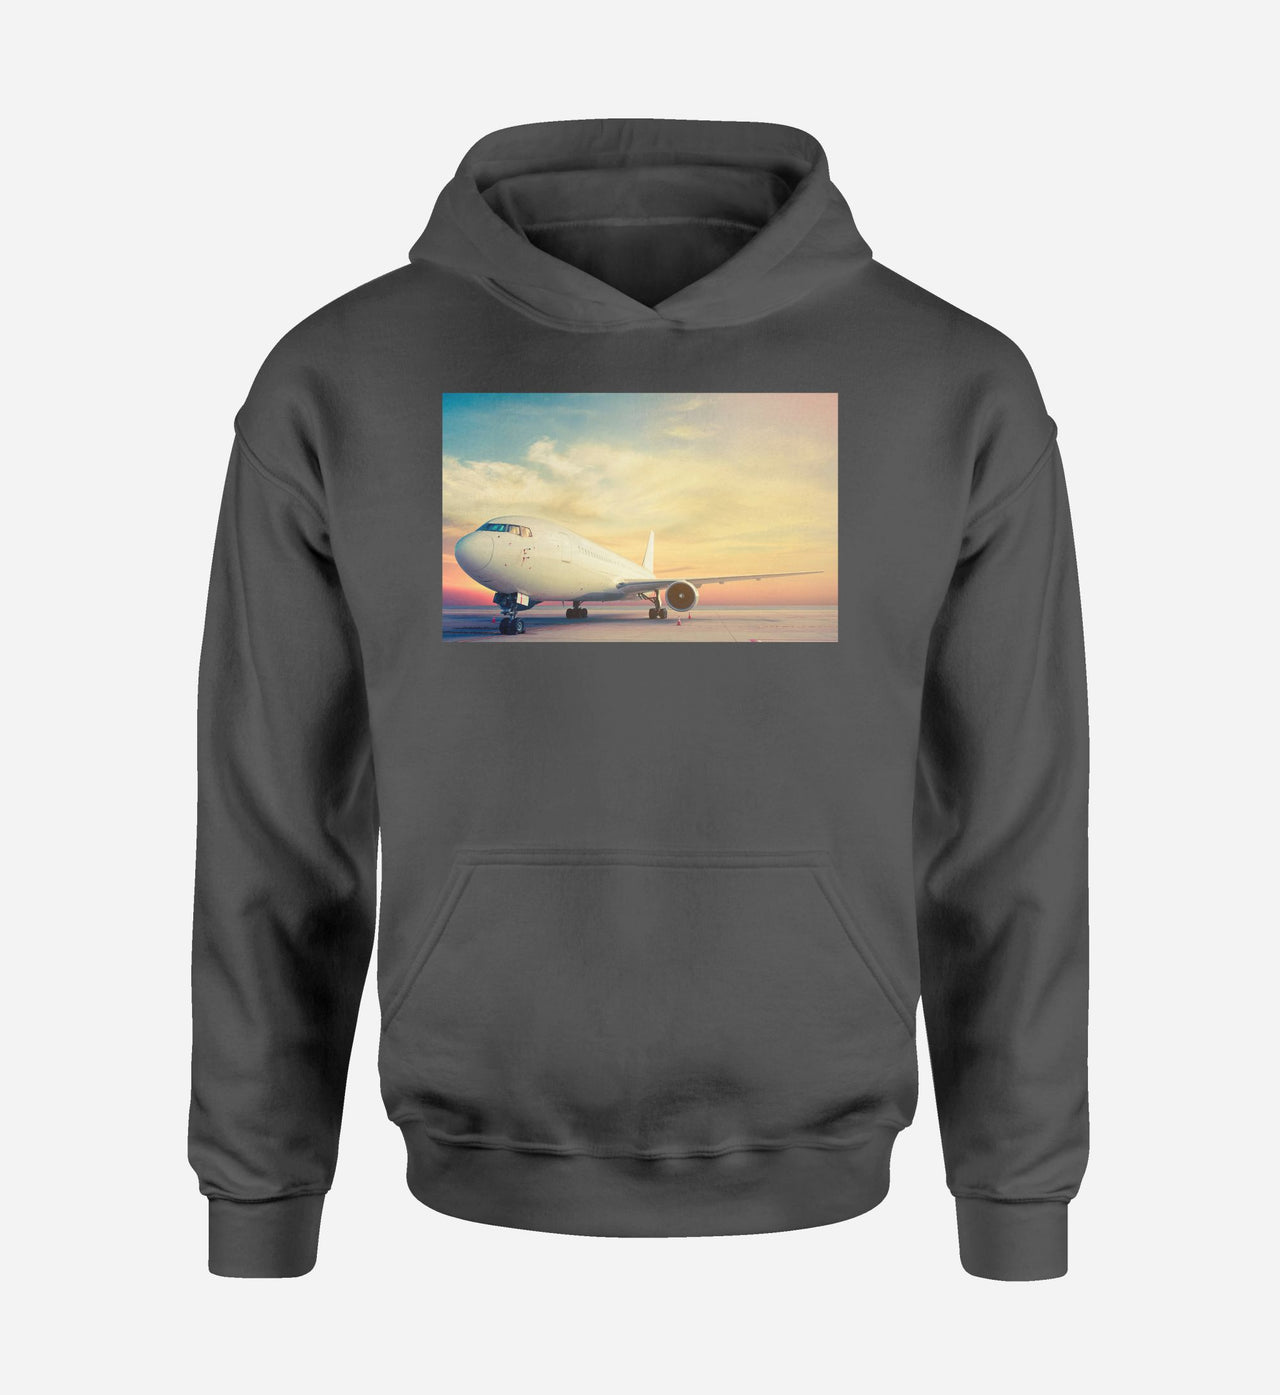 Parked Aircraft During Sunset Designed Hoodies